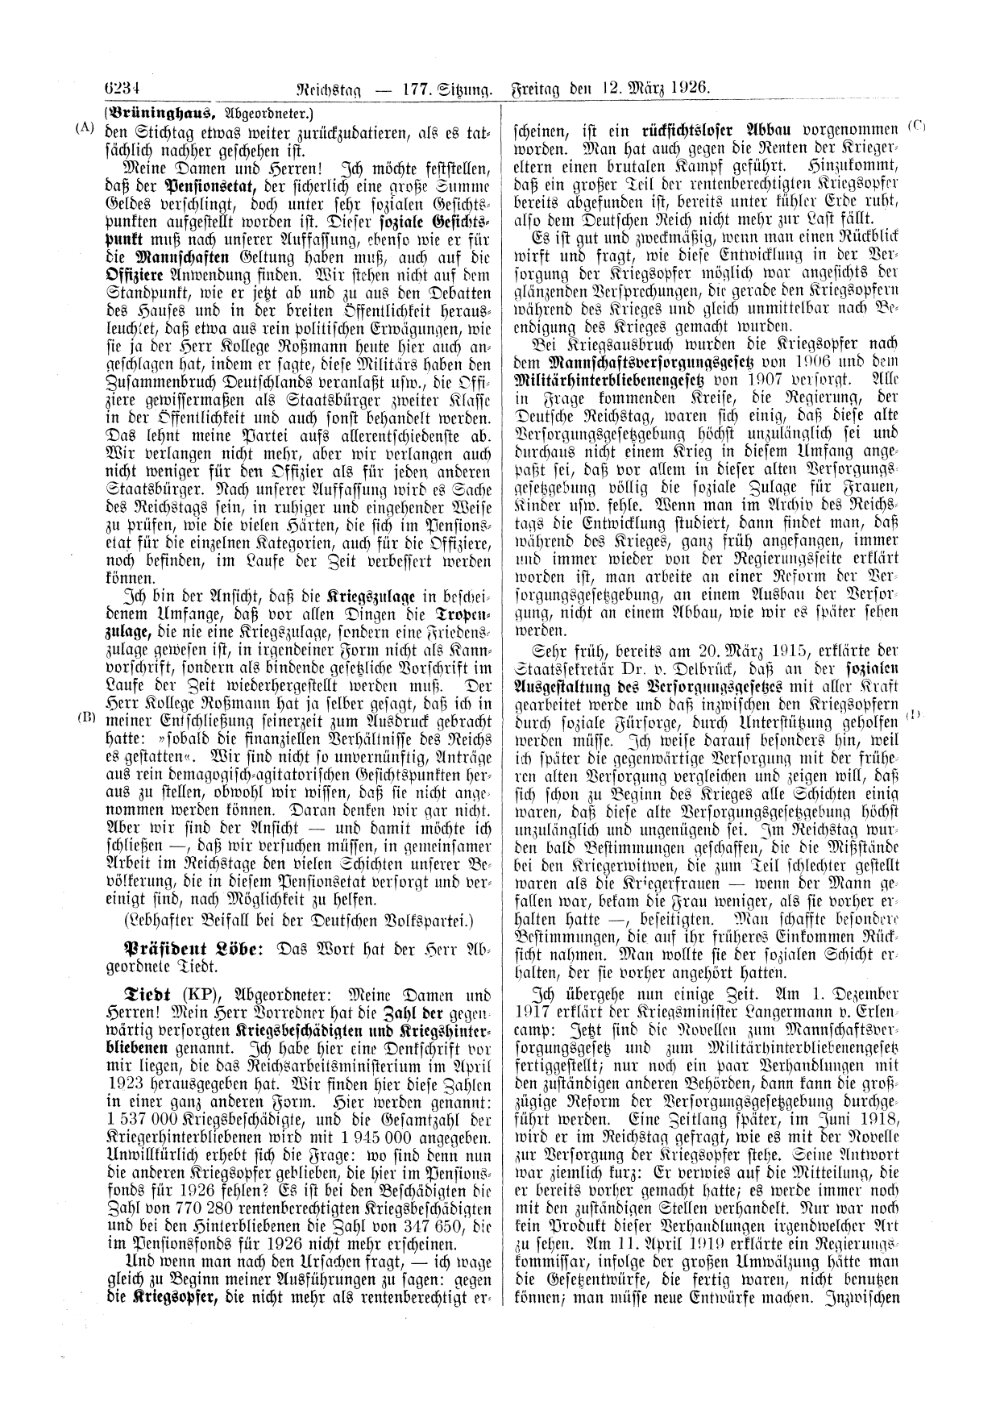 Scan of page 6234